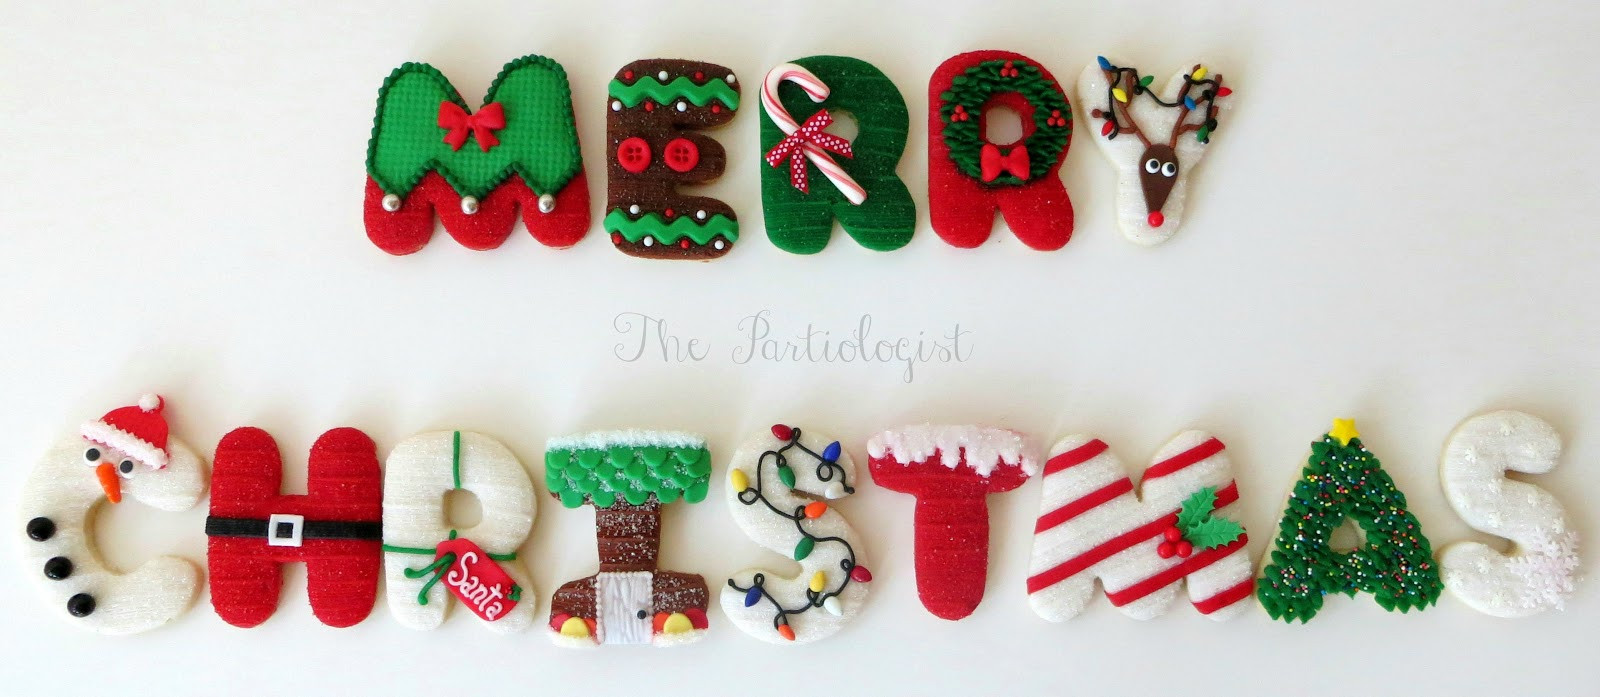 Merry Christmas Cookies
 The Partiologist Christmas Cookies